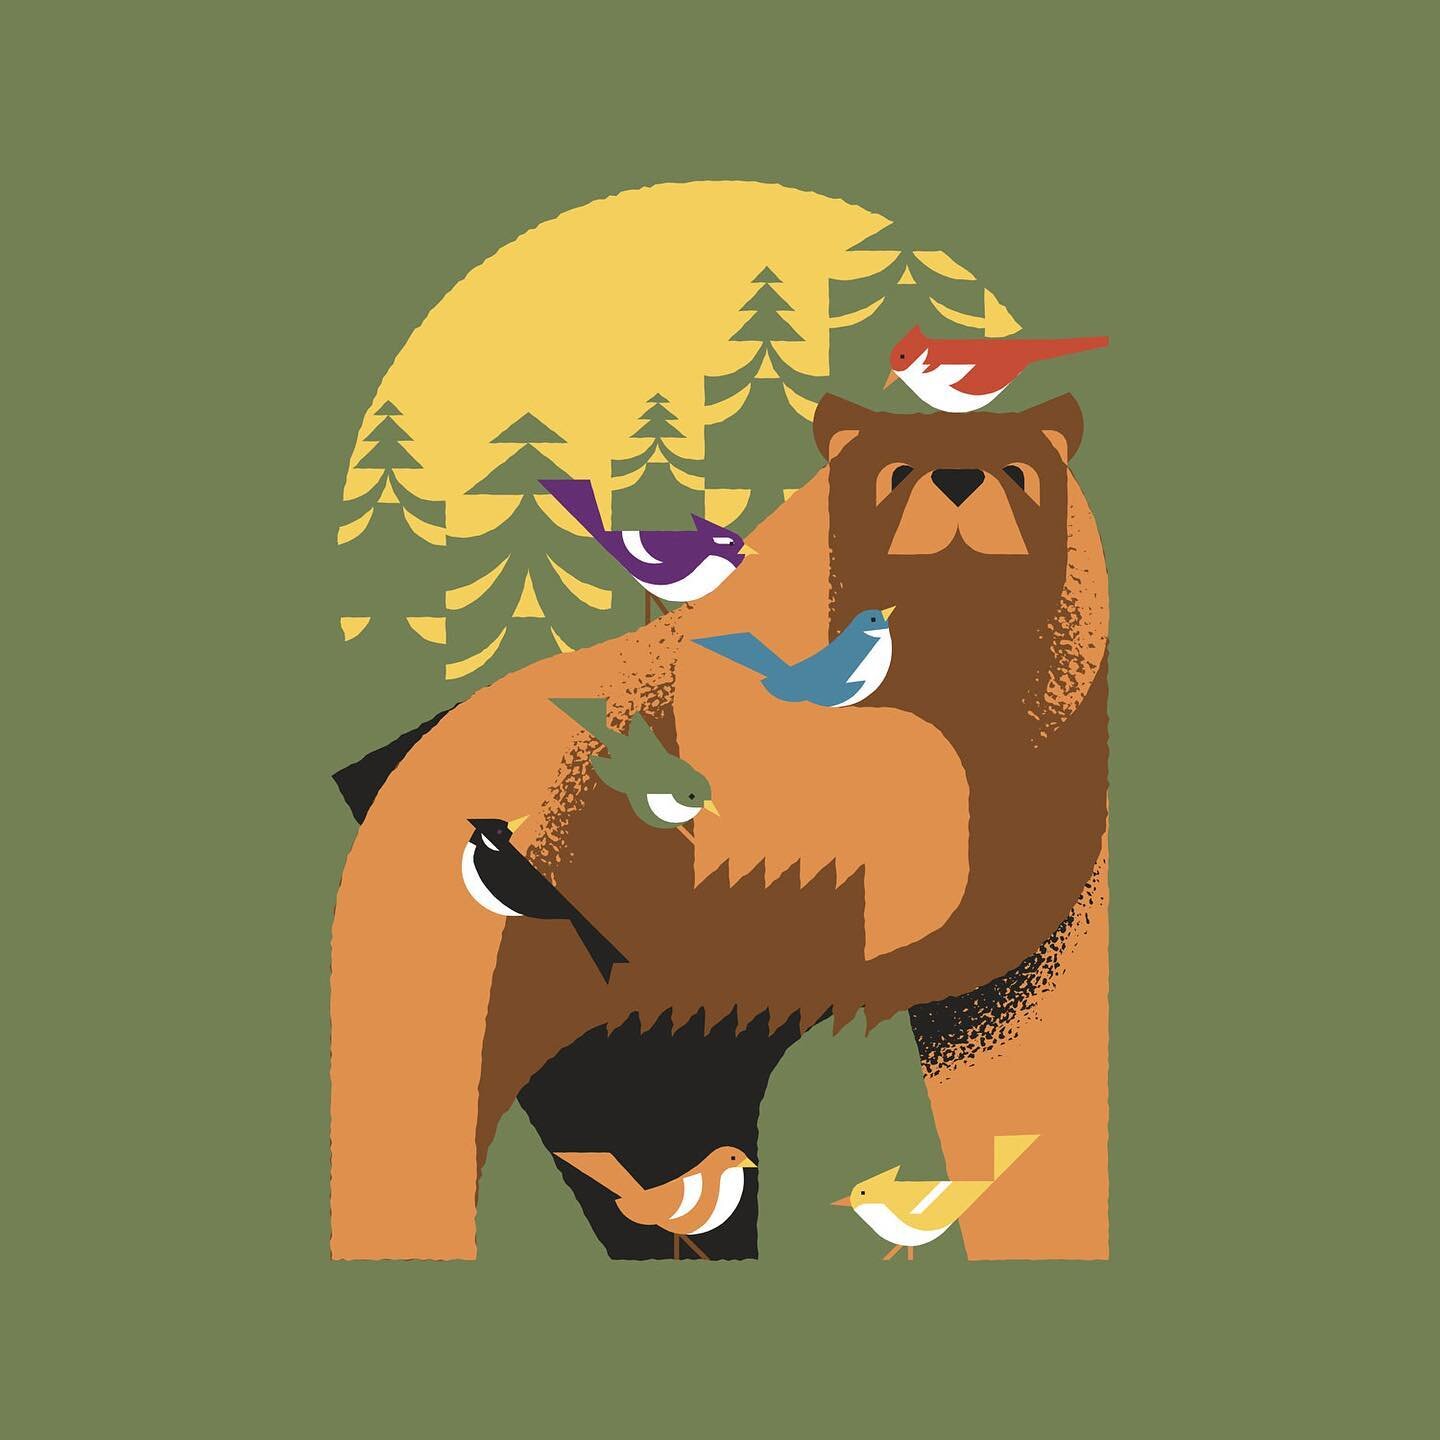 Happy Pride Month everyone! I&rsquo;m excited to share artwork I created for @rei to help celebrate.🐻🏳️&zwj;🌈 I&rsquo;m constantly&nbsp;inspired by my friends and family within the queer community. A bear represents the strength and courage it tak